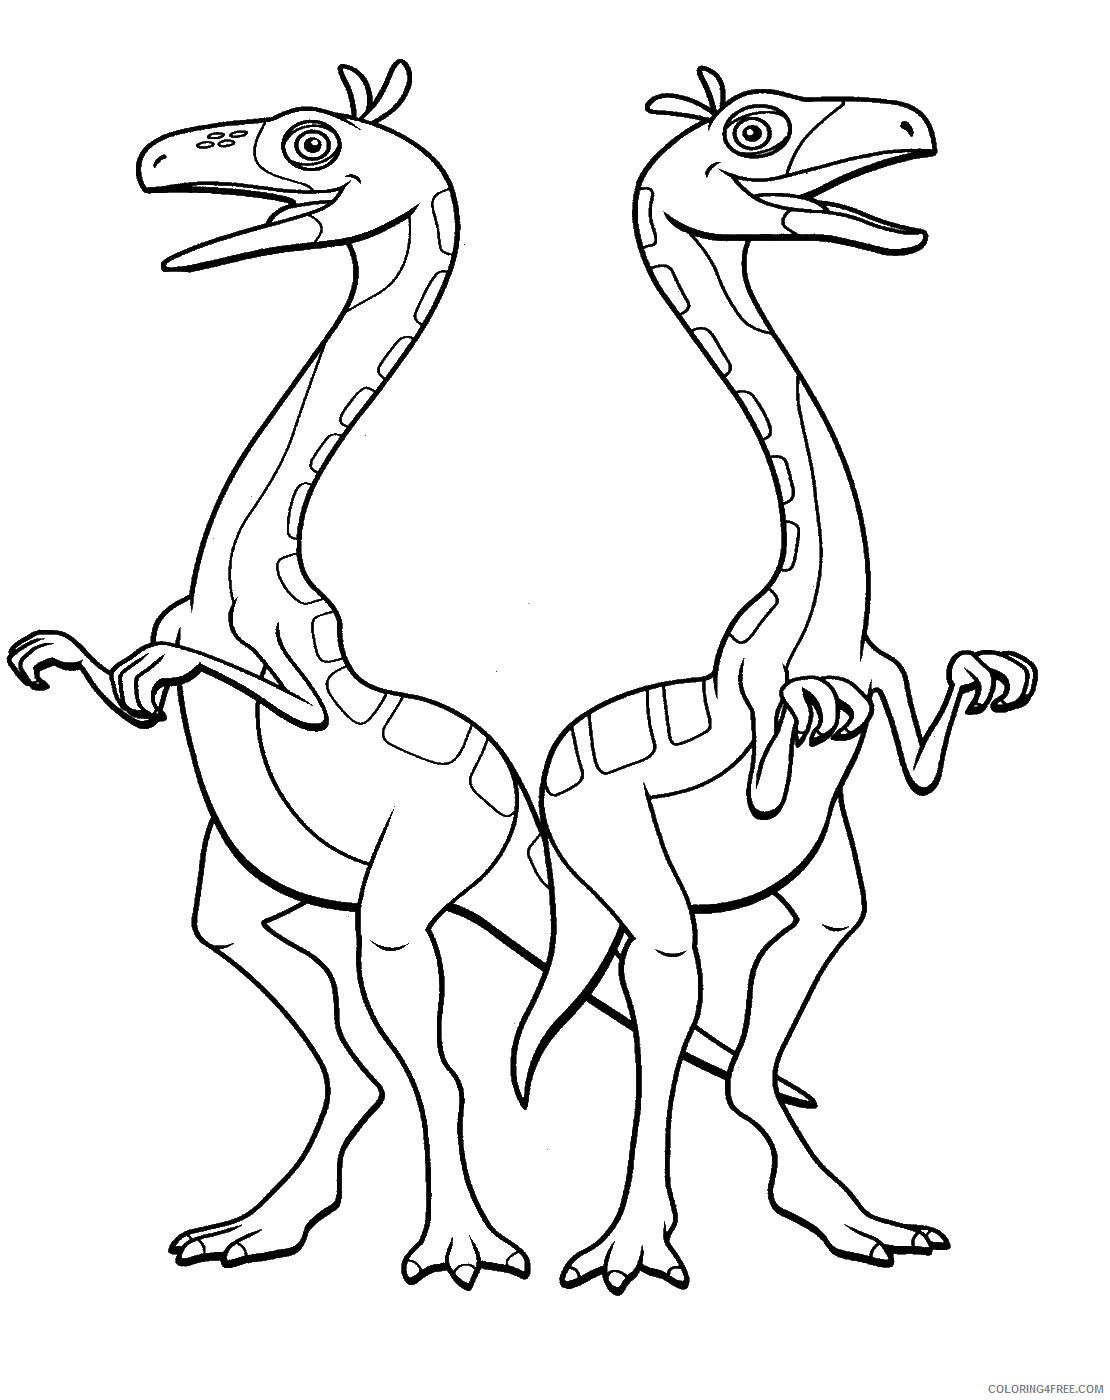 Dinosaur Train Coloring Pages Cartoons dino_train_cl_30 Printable 2020 2251 Coloring4free